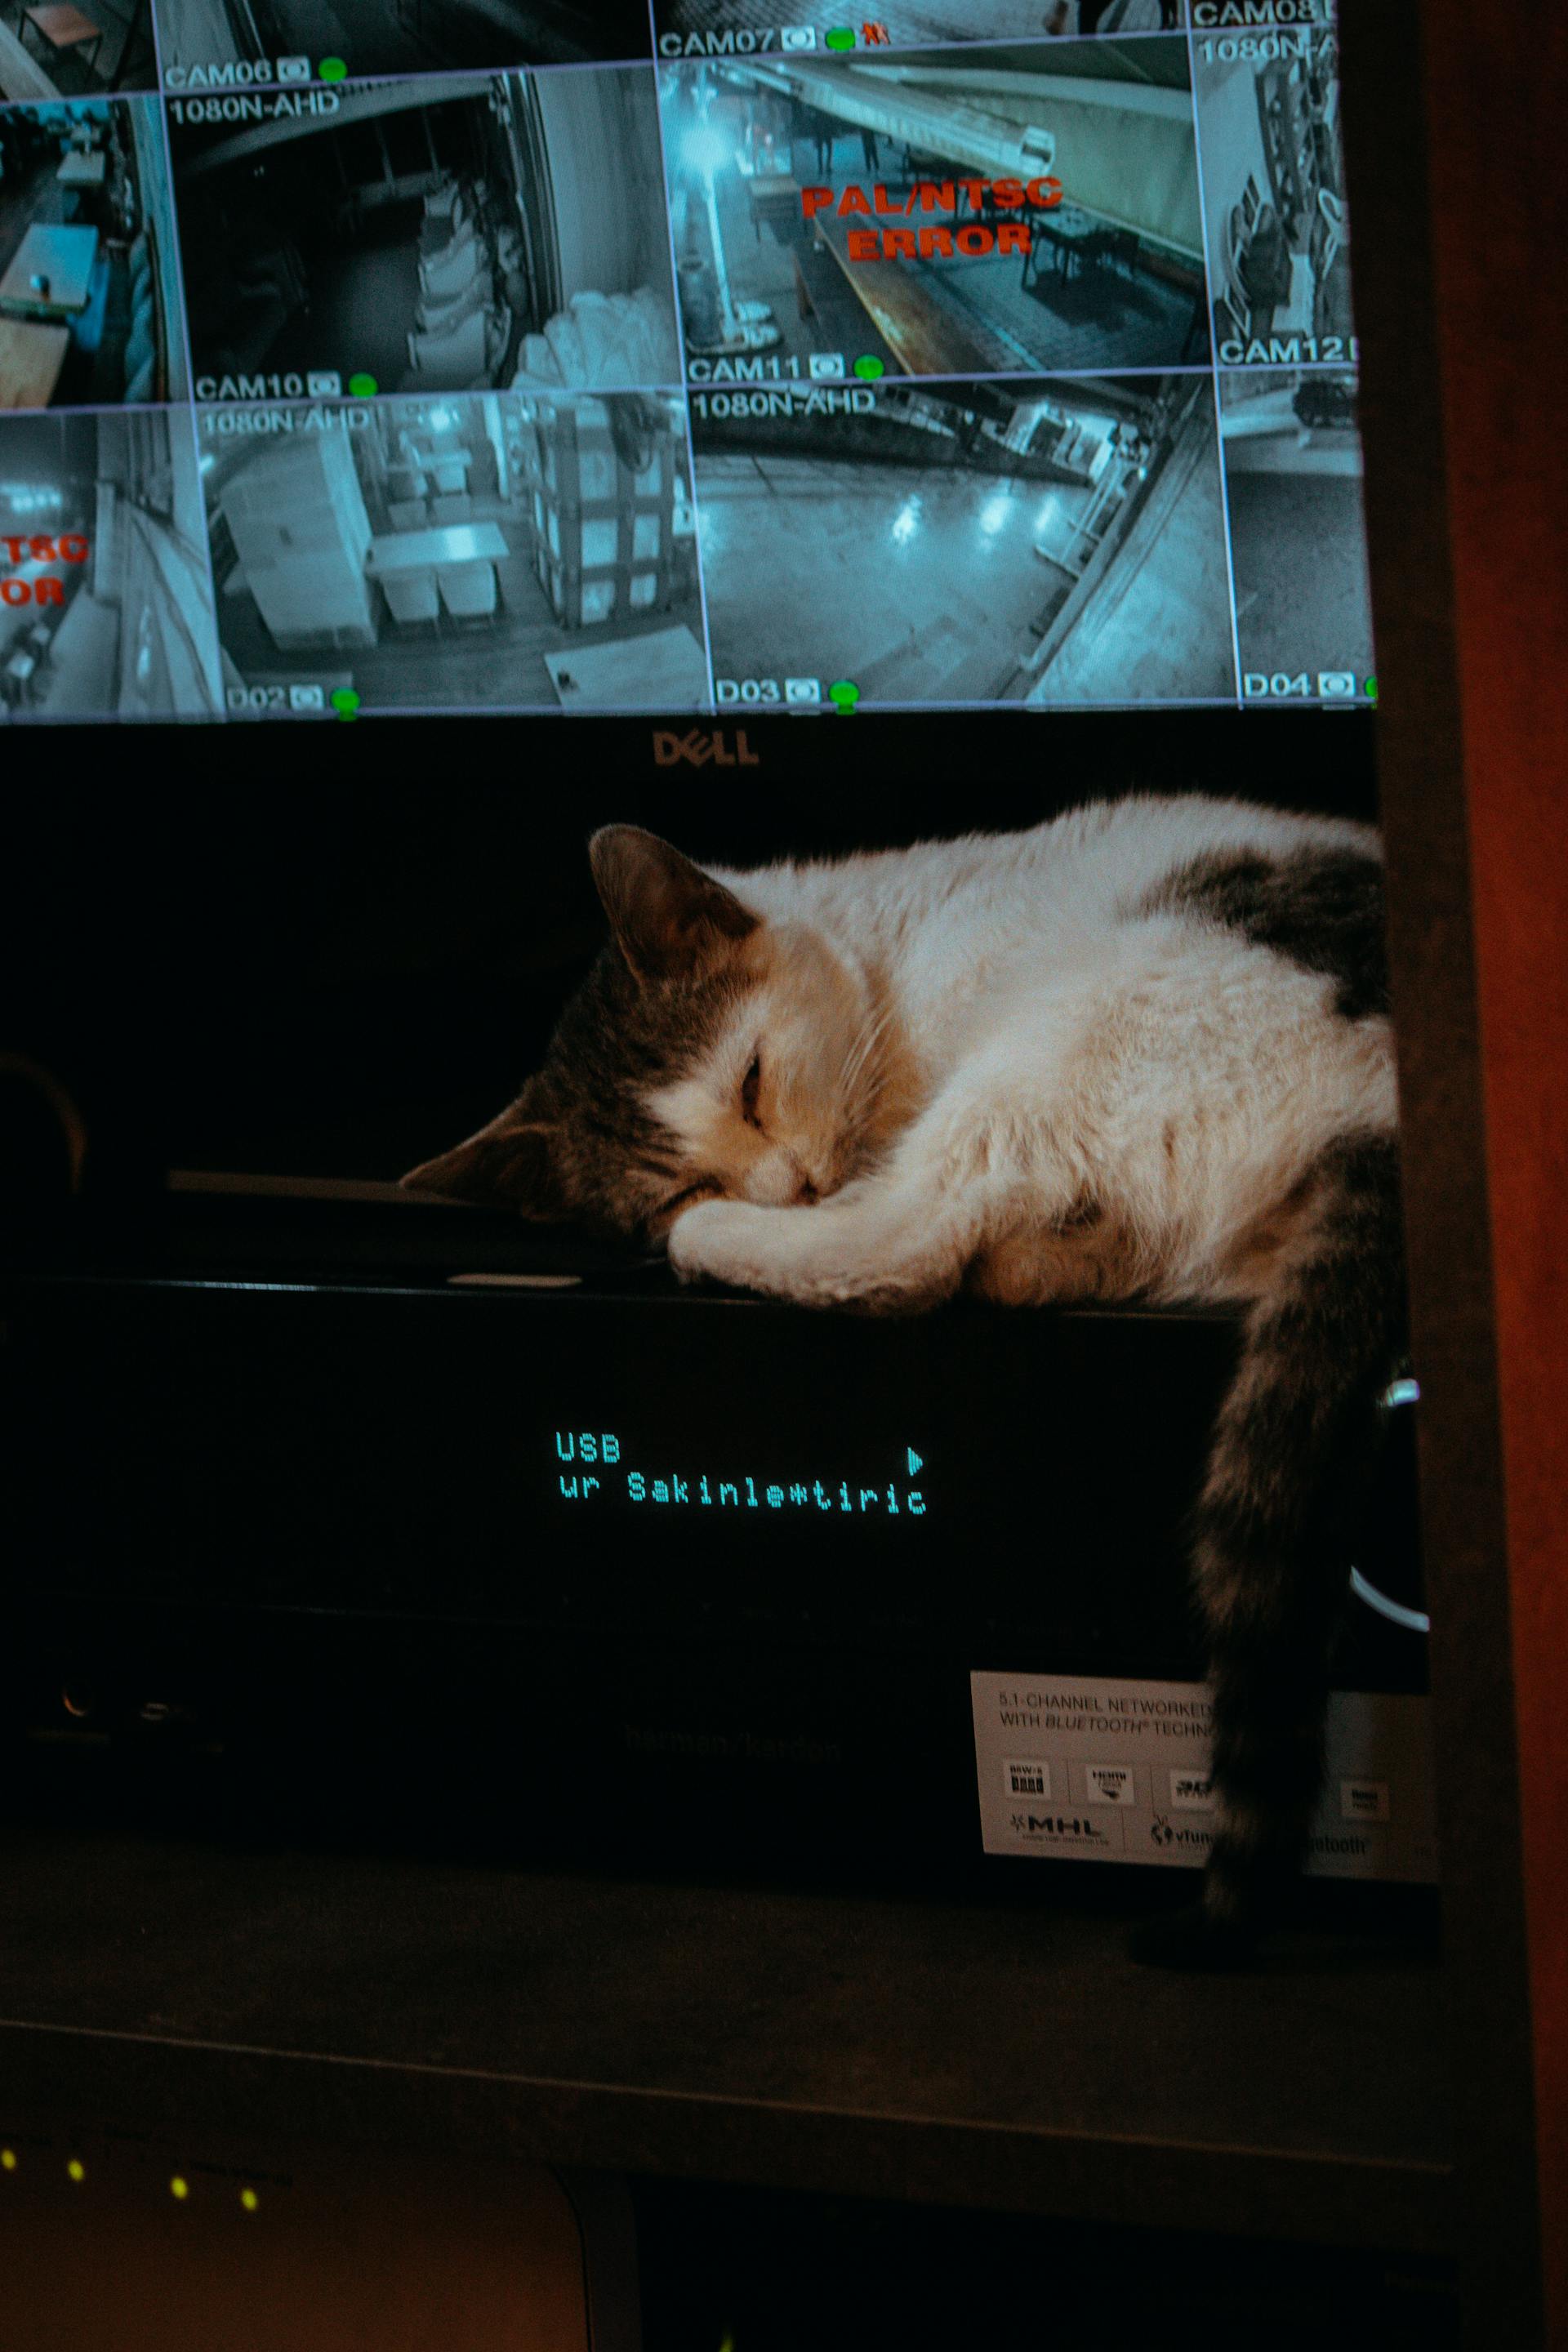 A cat sleeping under a screen with the footage from CCTV cameras | Source: Pexels